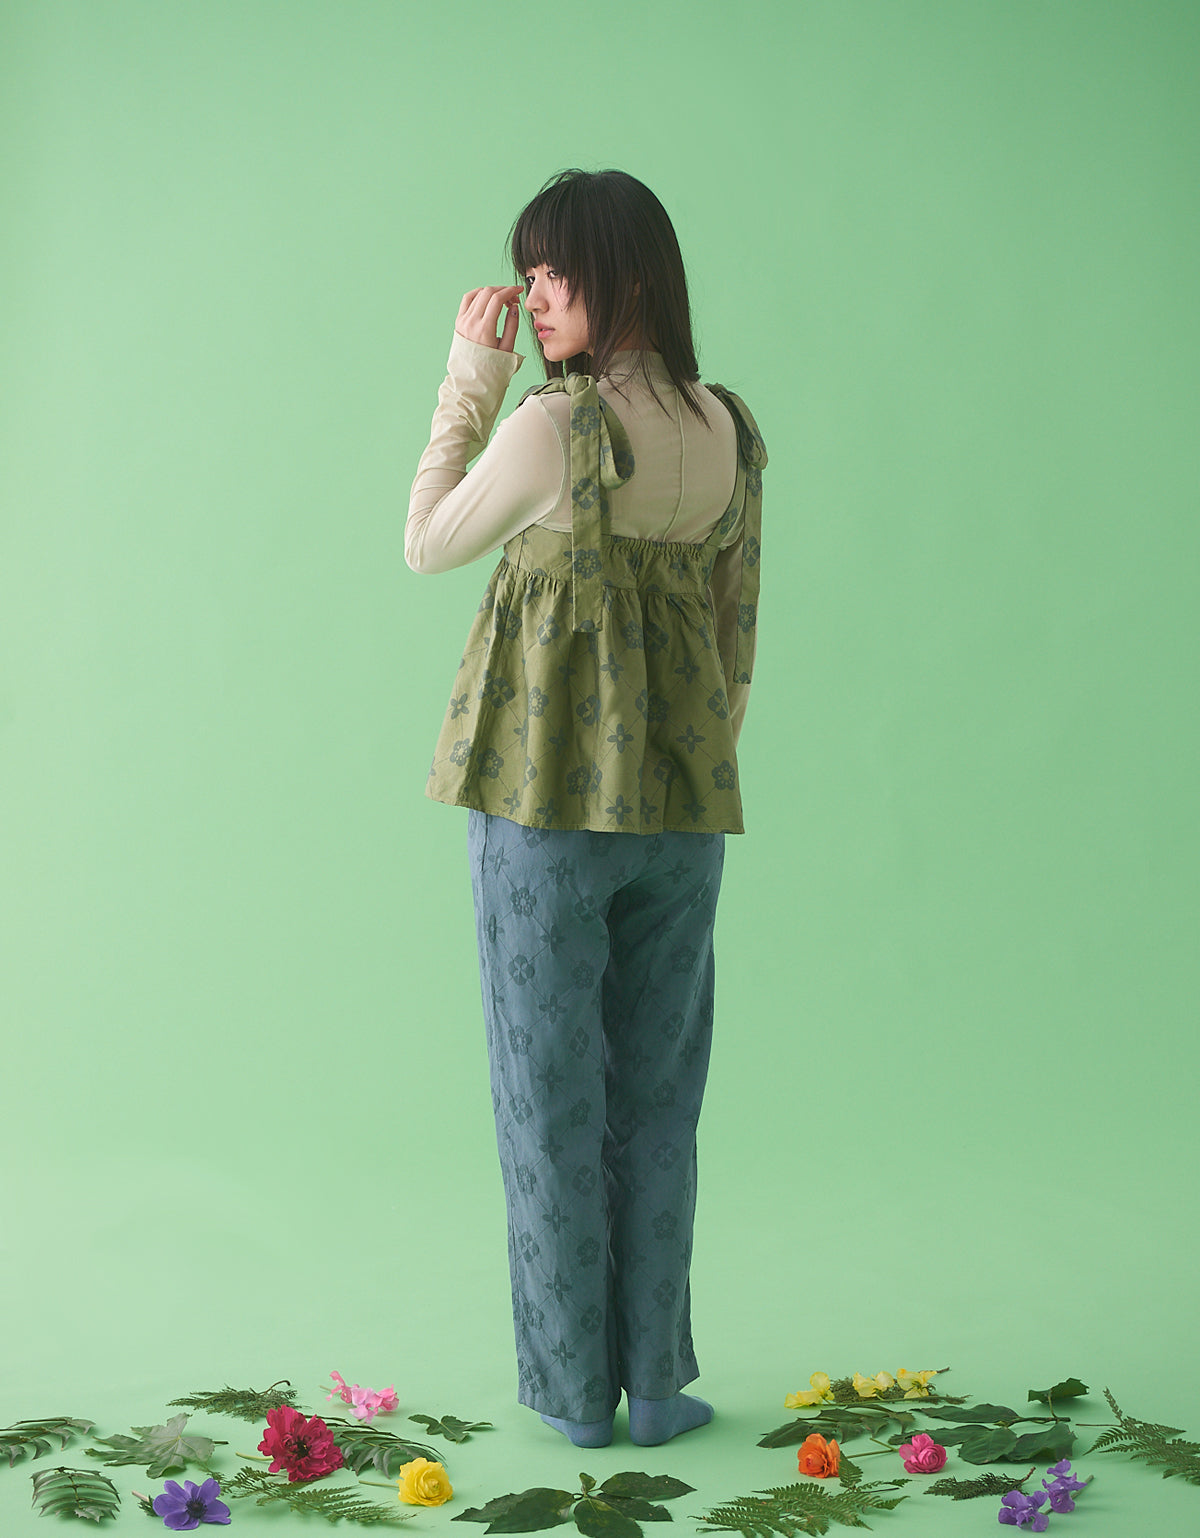 「MOUNE」Gathered tops with ribbons on the shoulders